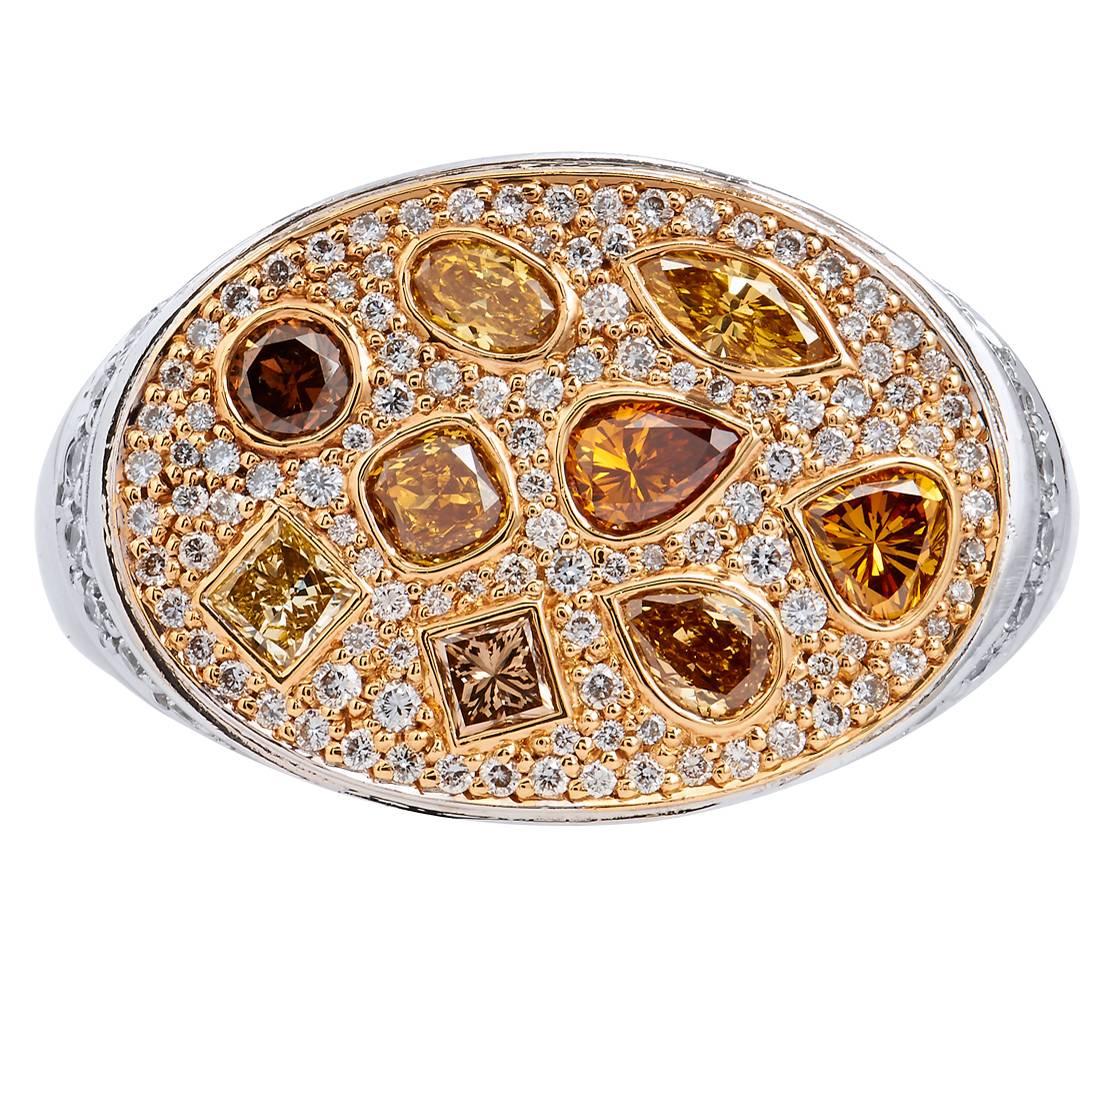 Hans D. Krieger 18 karat Yellow and White Gold with Colored Diamonds Oval Ring 7